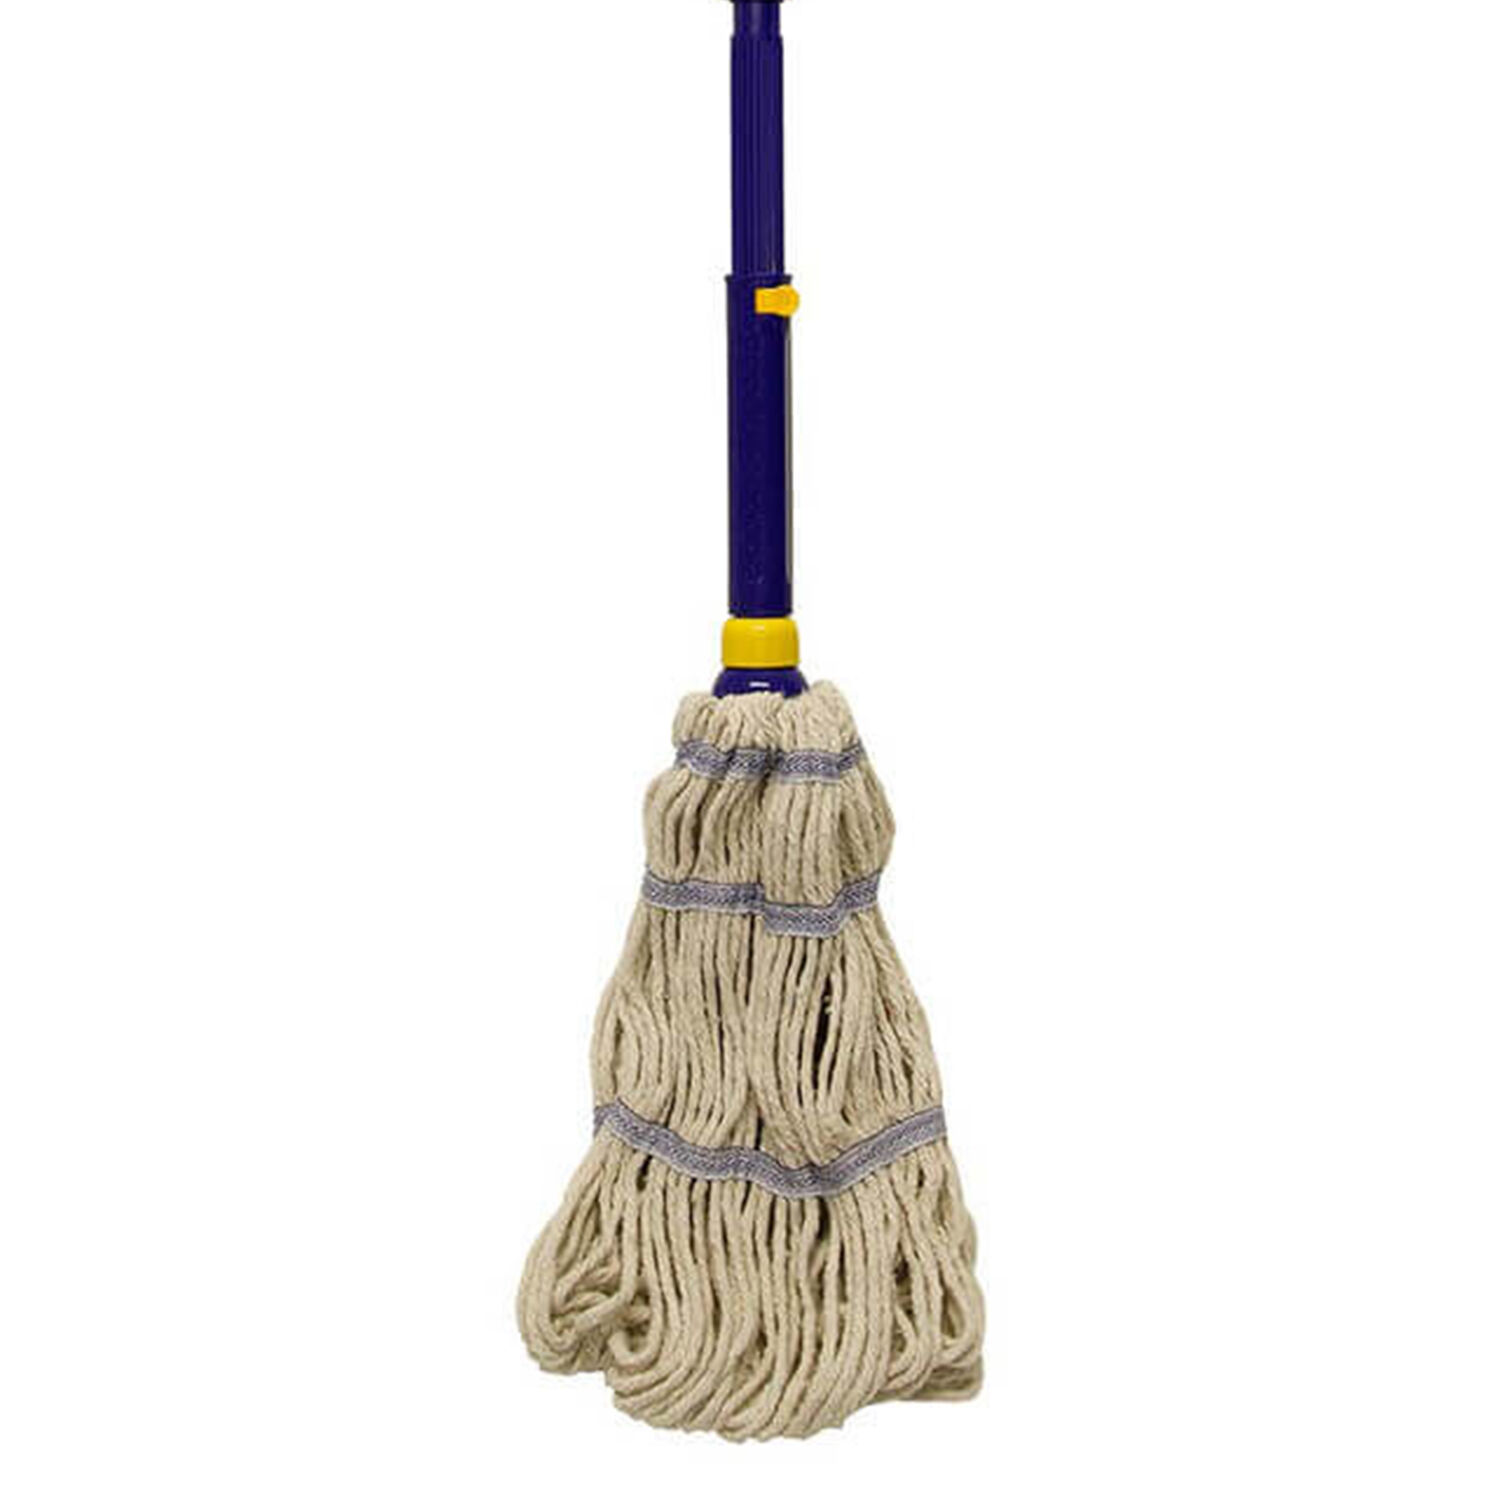 Ace Collection Twist Mop | CLEANING | SHOP HOME BASICS